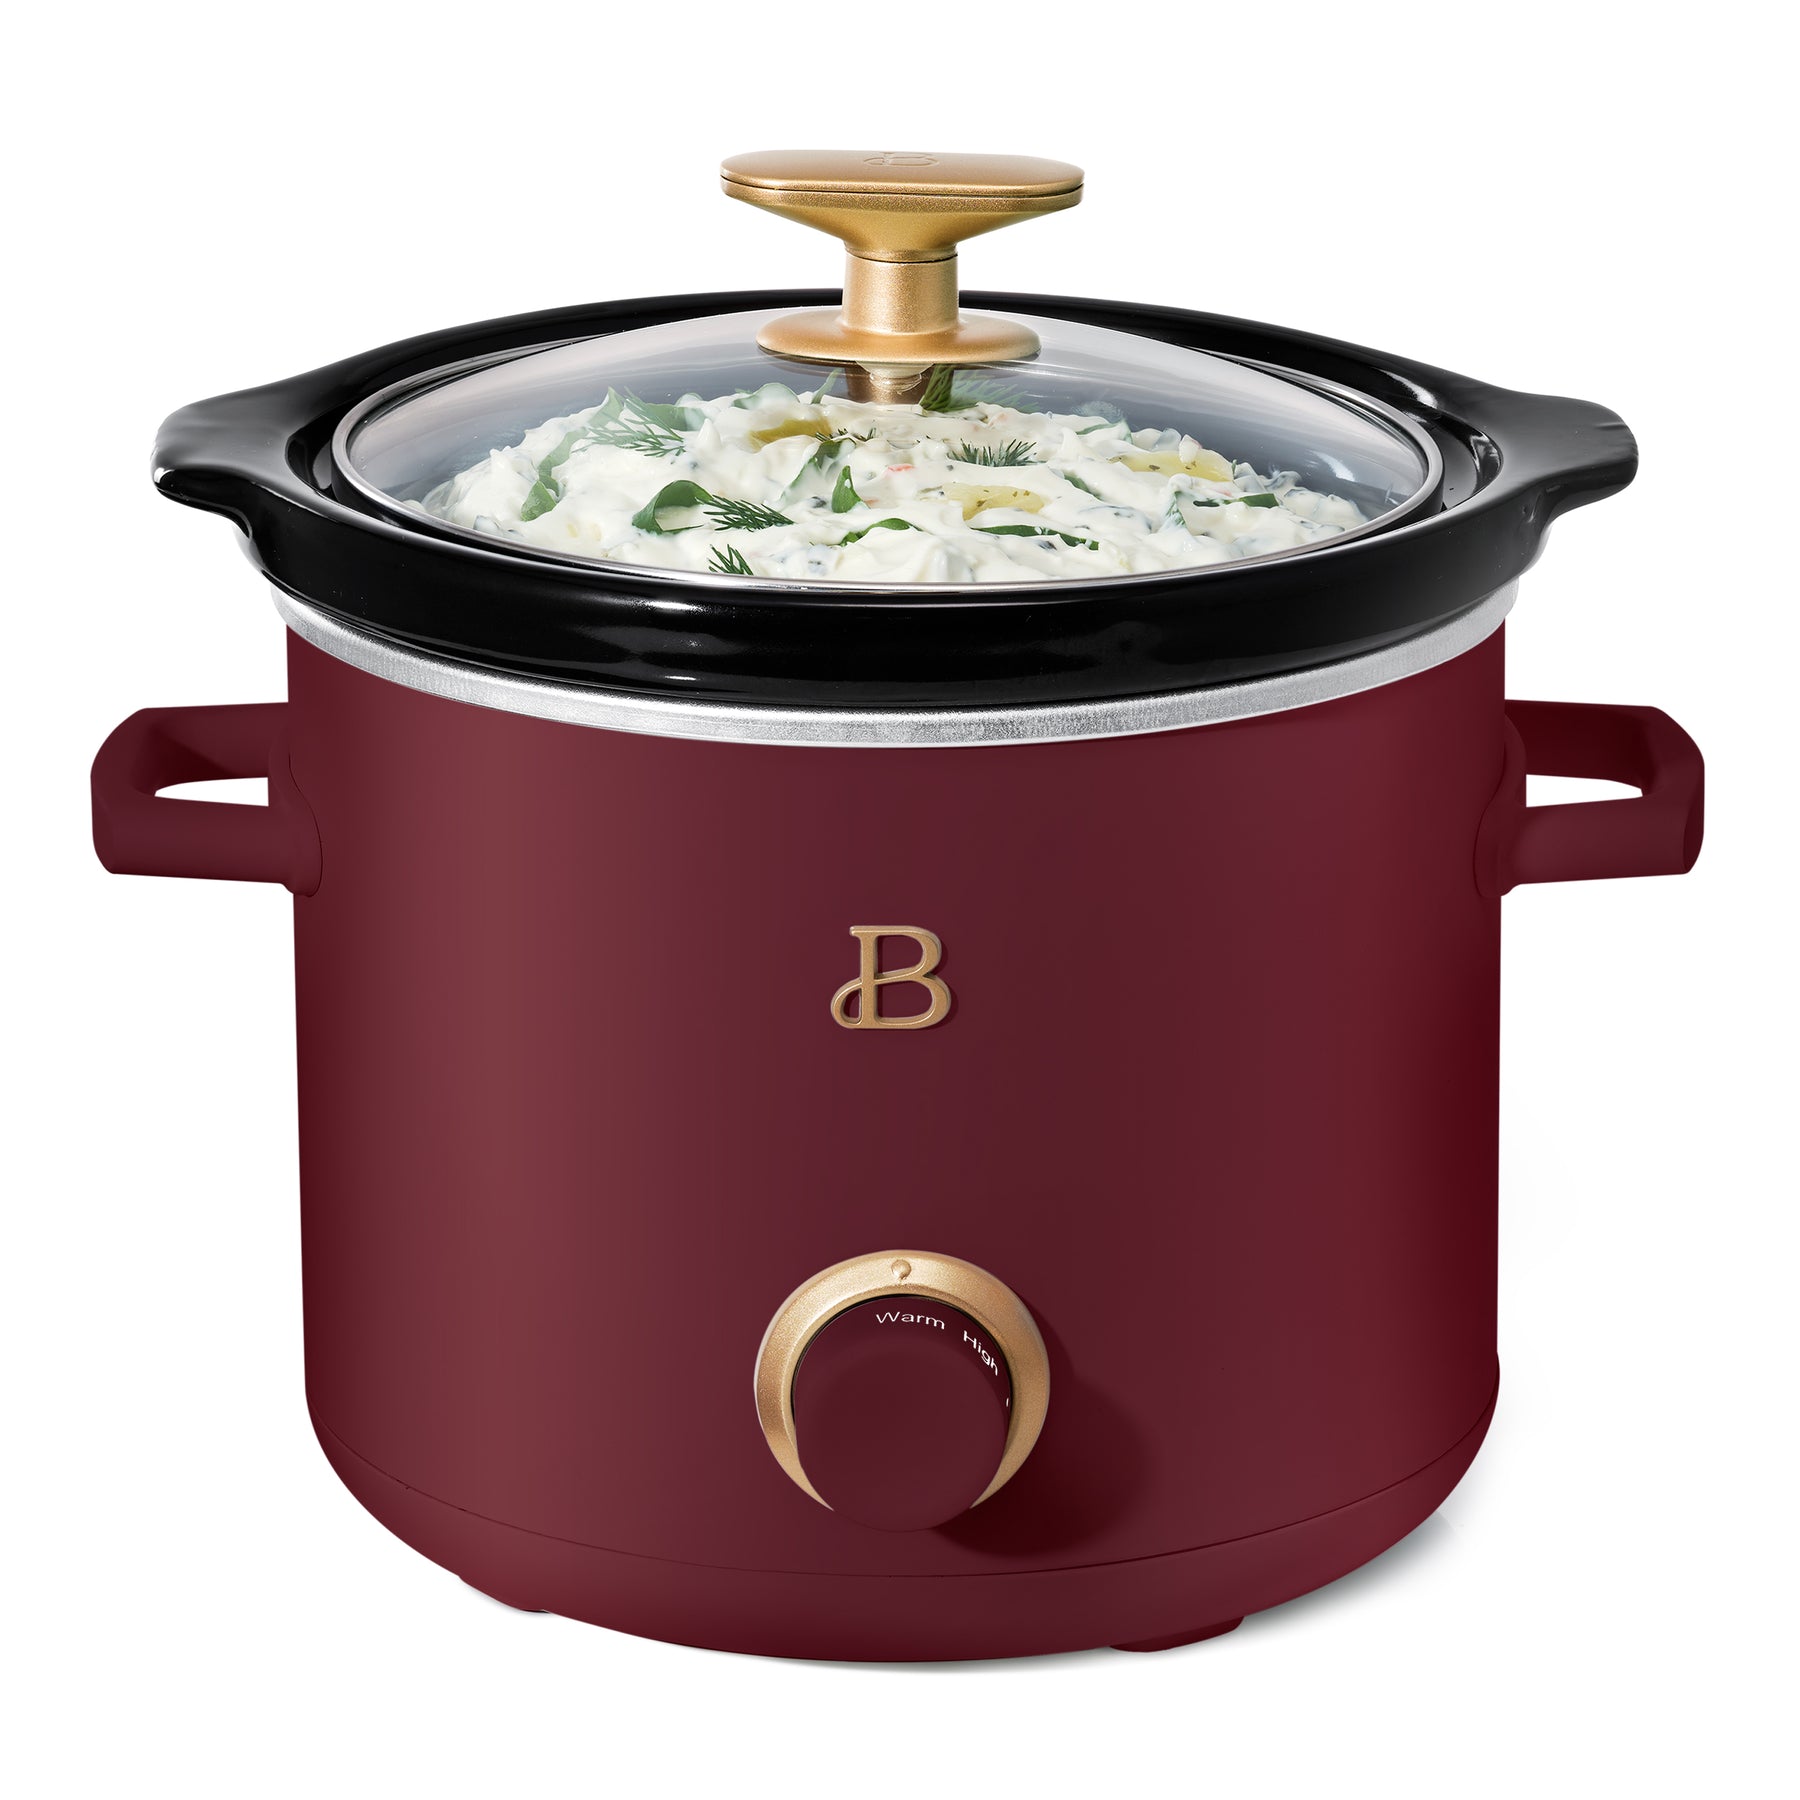 2qt Slow Cooker Set, 2-Pack, White Icing and Merlot – Beautiful™